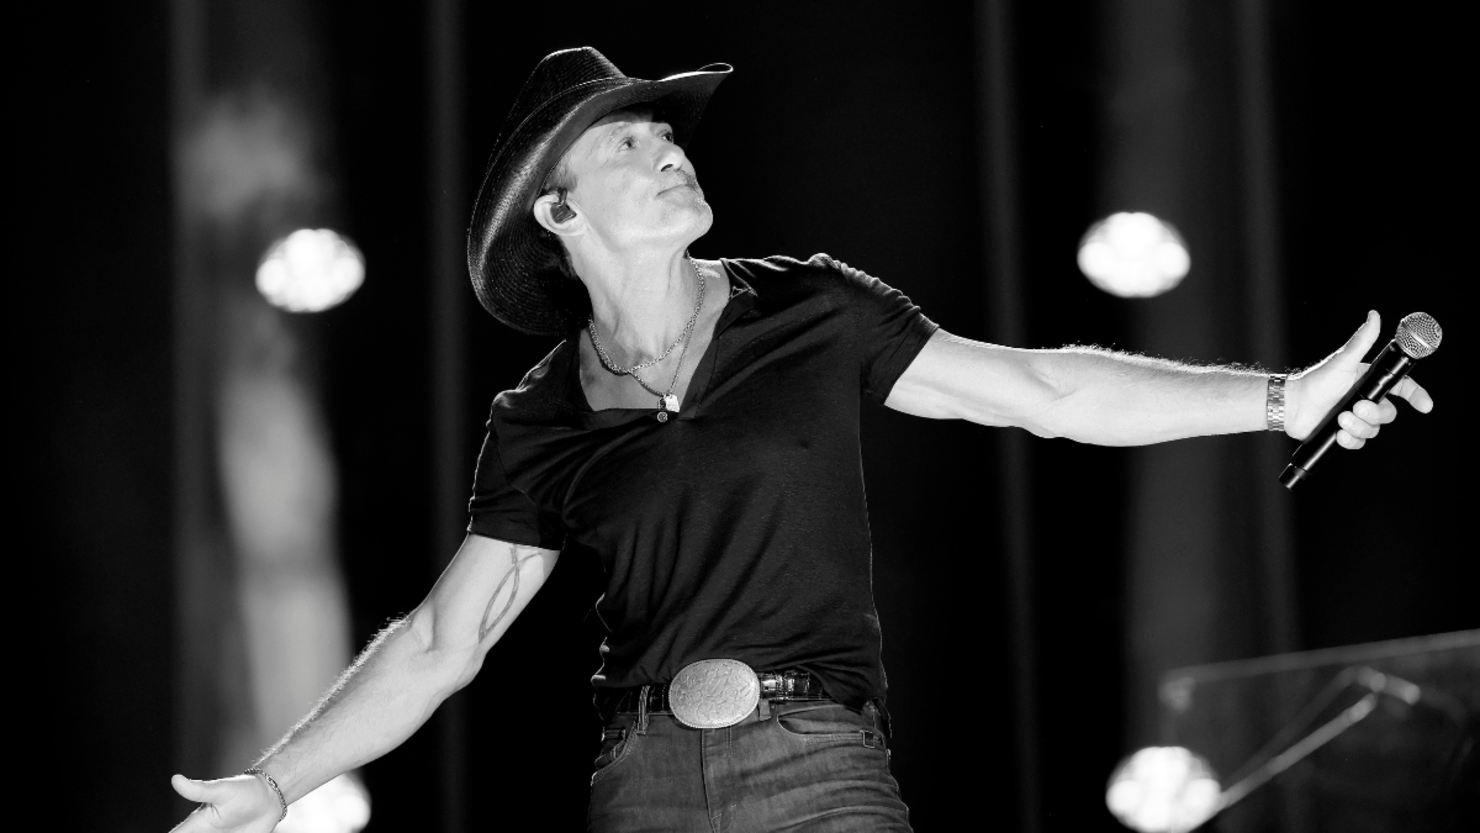 EXCLUSIVE: Tim McGraw Pays Tribute To Late Mets Pitcher Dad Tug McGraw  During World Series